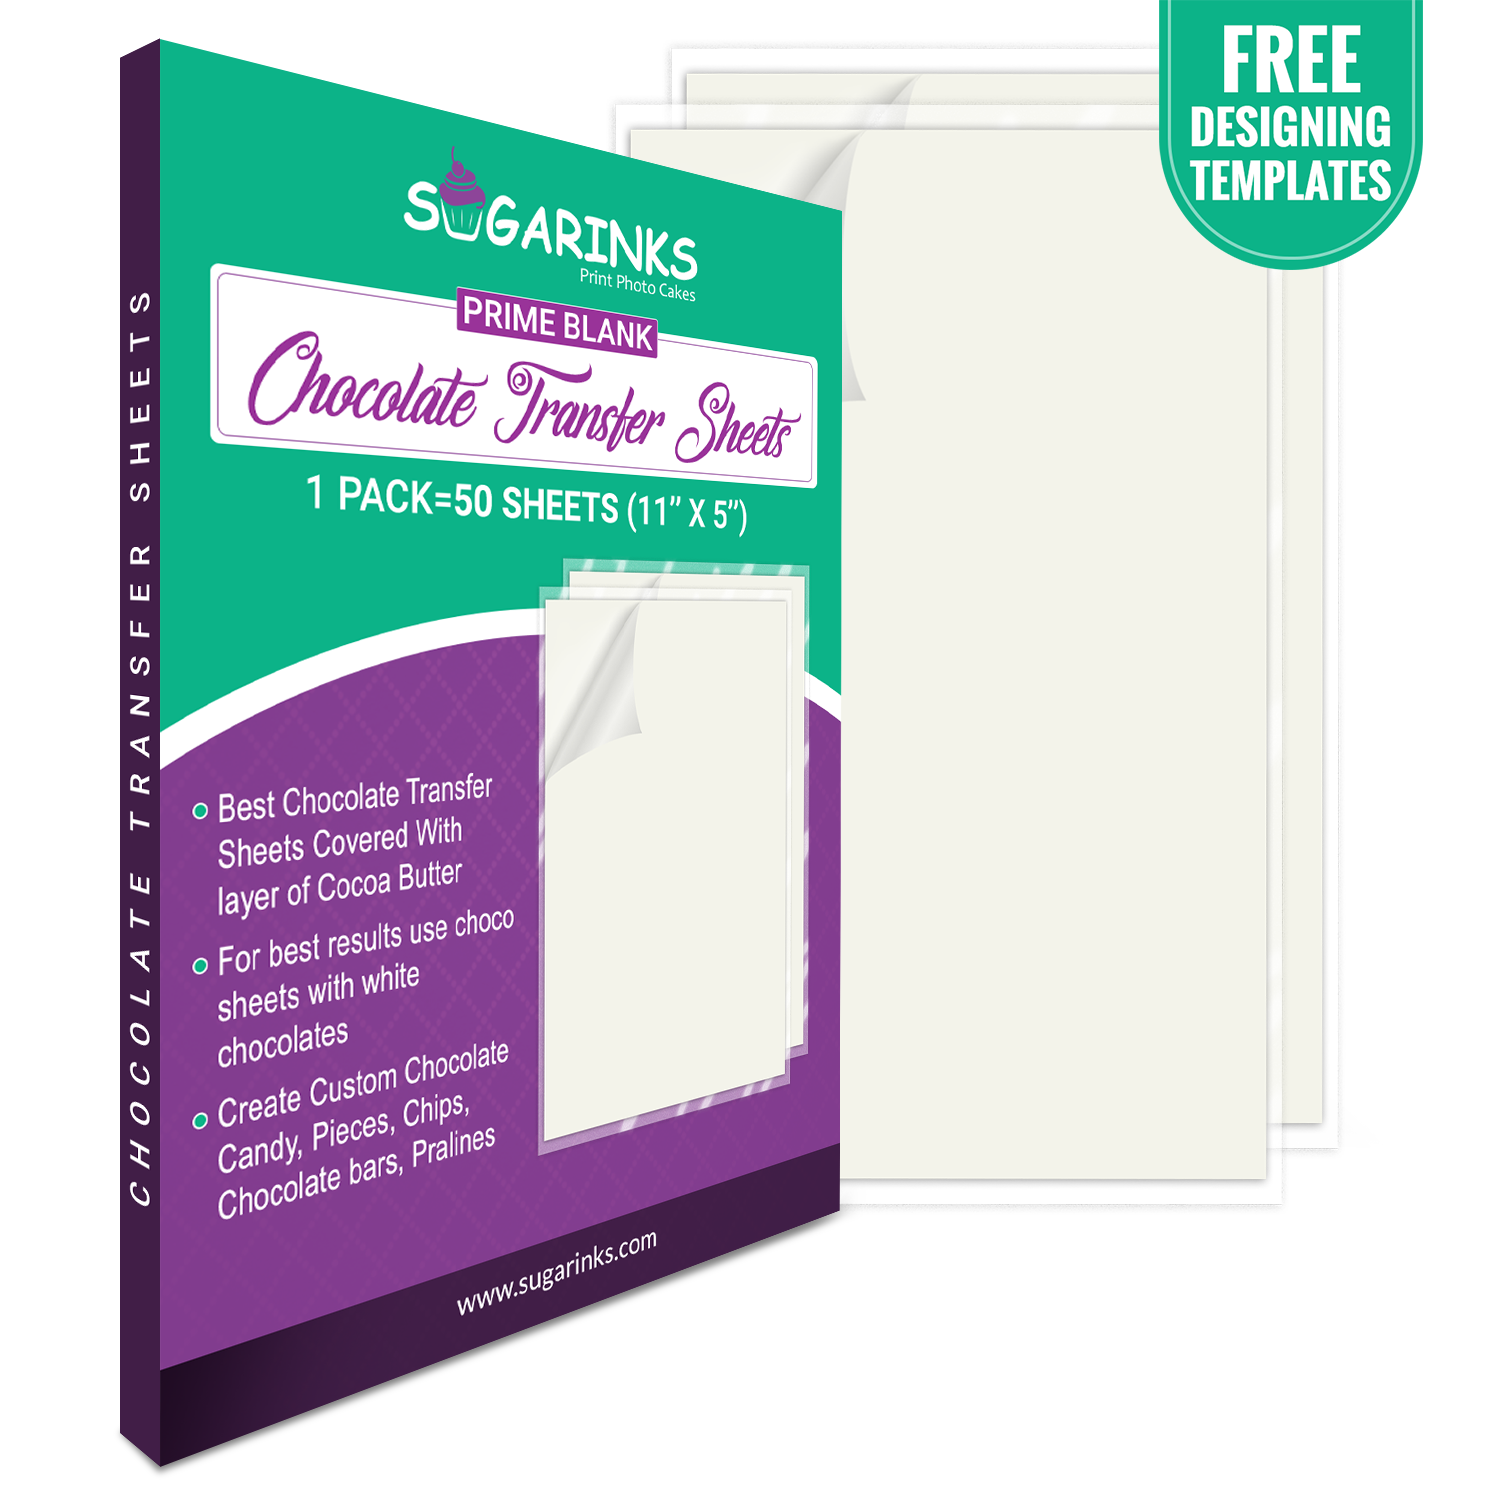 Sugarinks Prime Blank Chocolate Transfer Sheets A4 Size (11”X5”) – Pack of 50